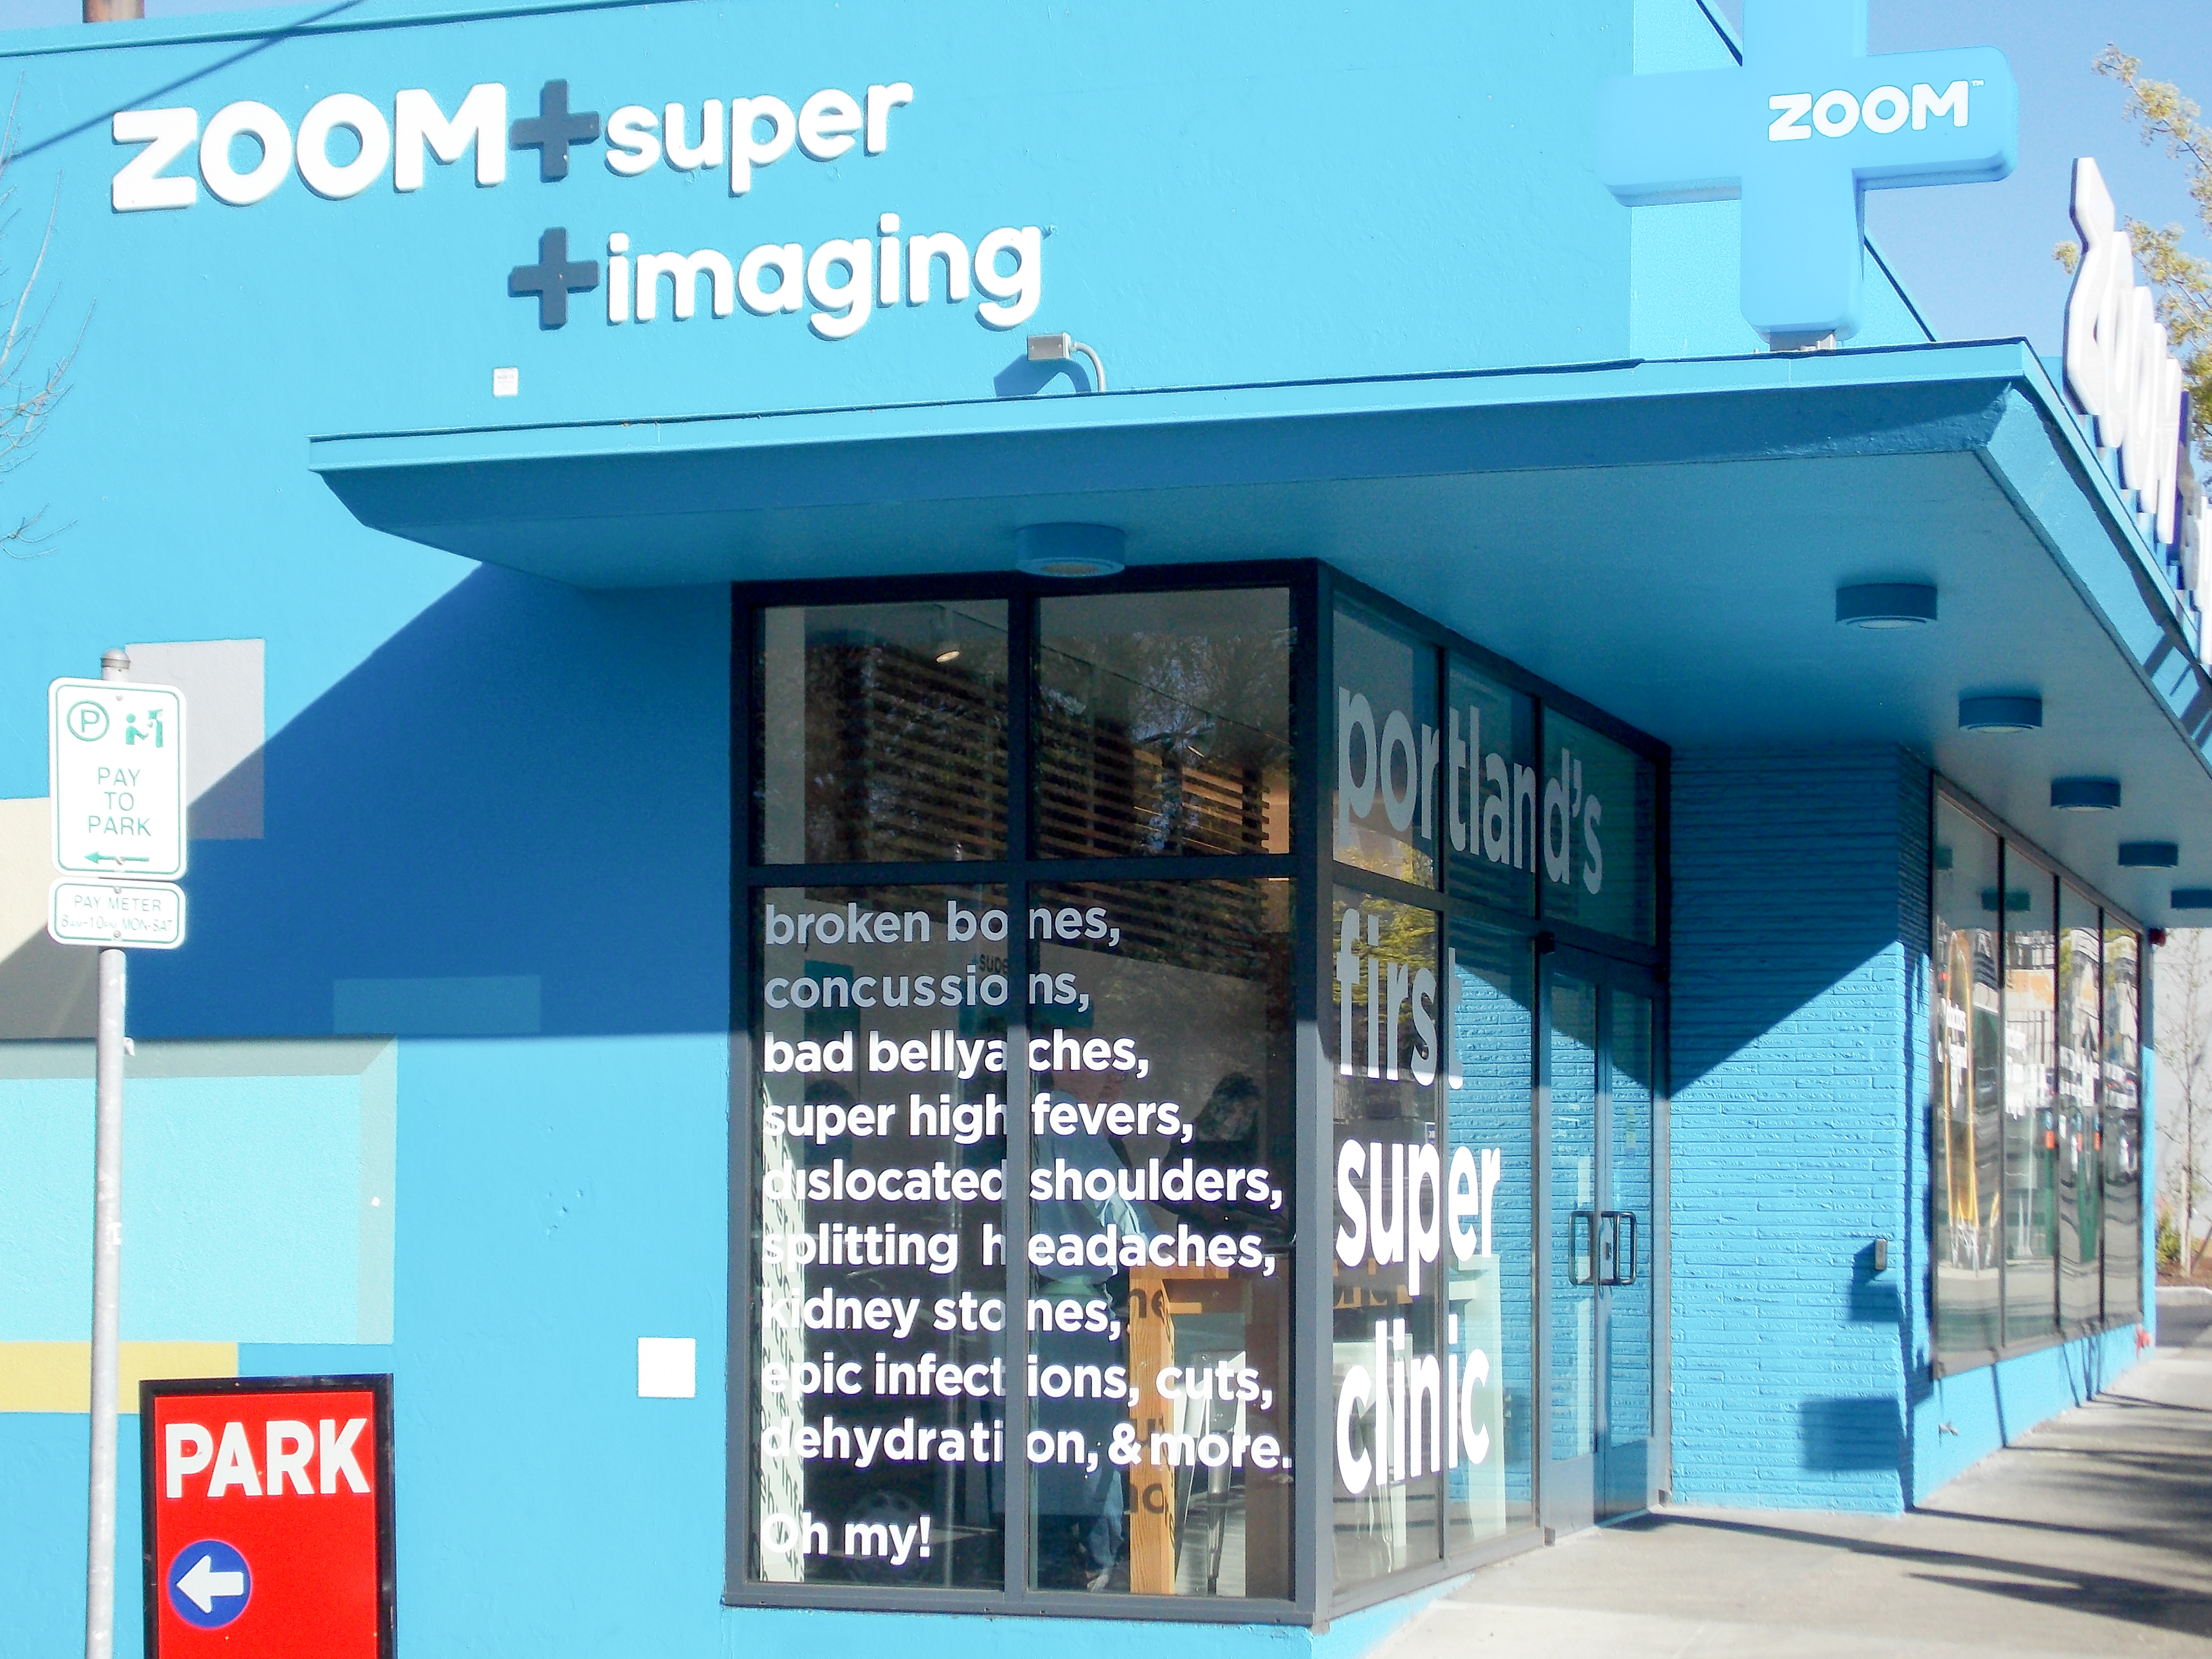 Zoom+ opened an emergency clinic in Portland to treat patients with broken bones and other accidents. The new clinic was part of an expansion that included adding primary care, specialist visits and an insurance plan.